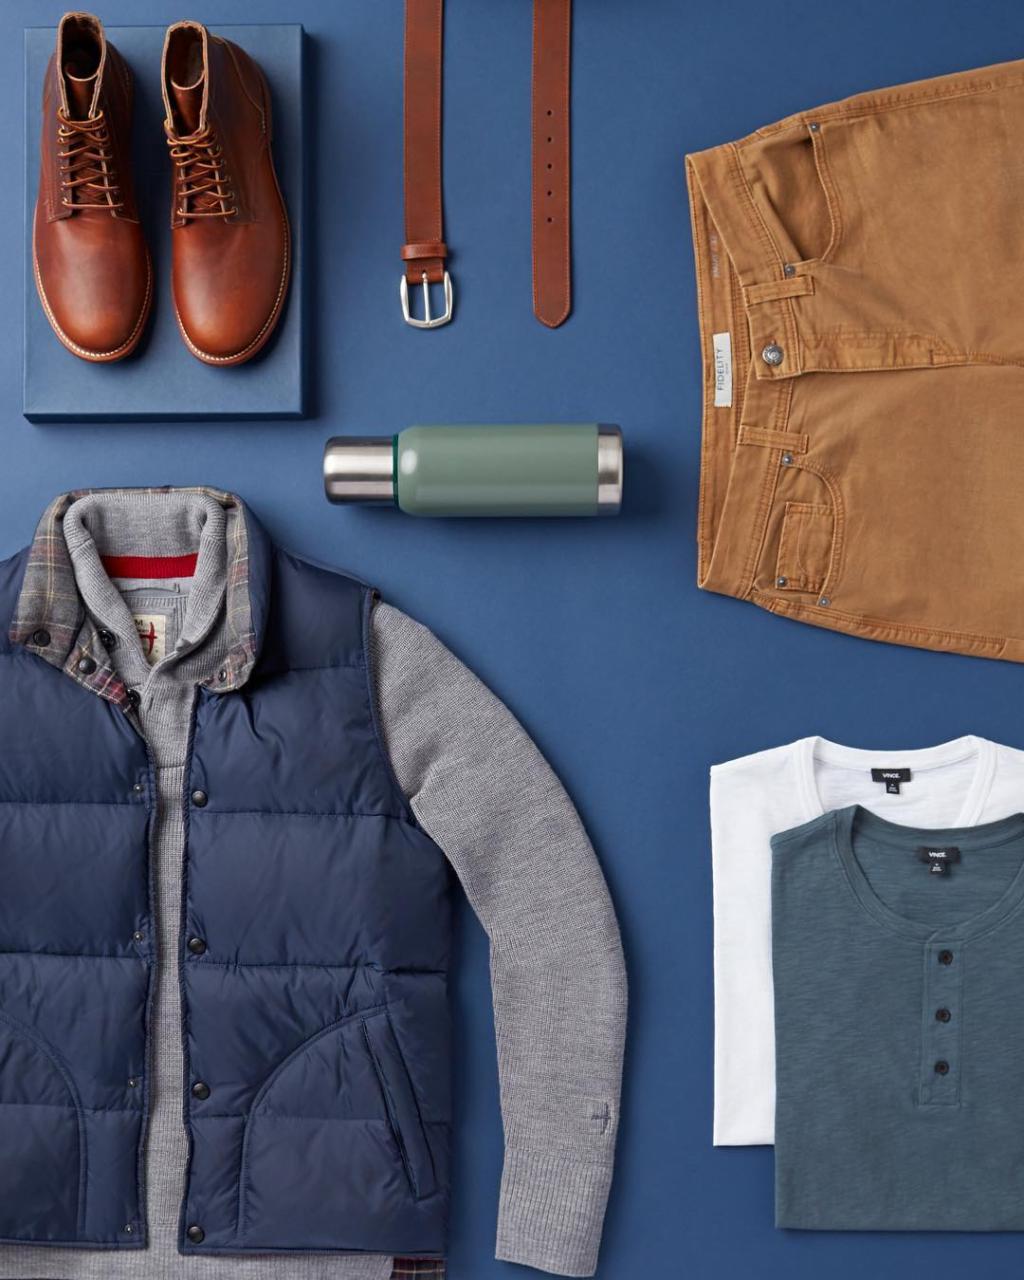 How Does Trunk Club Work?